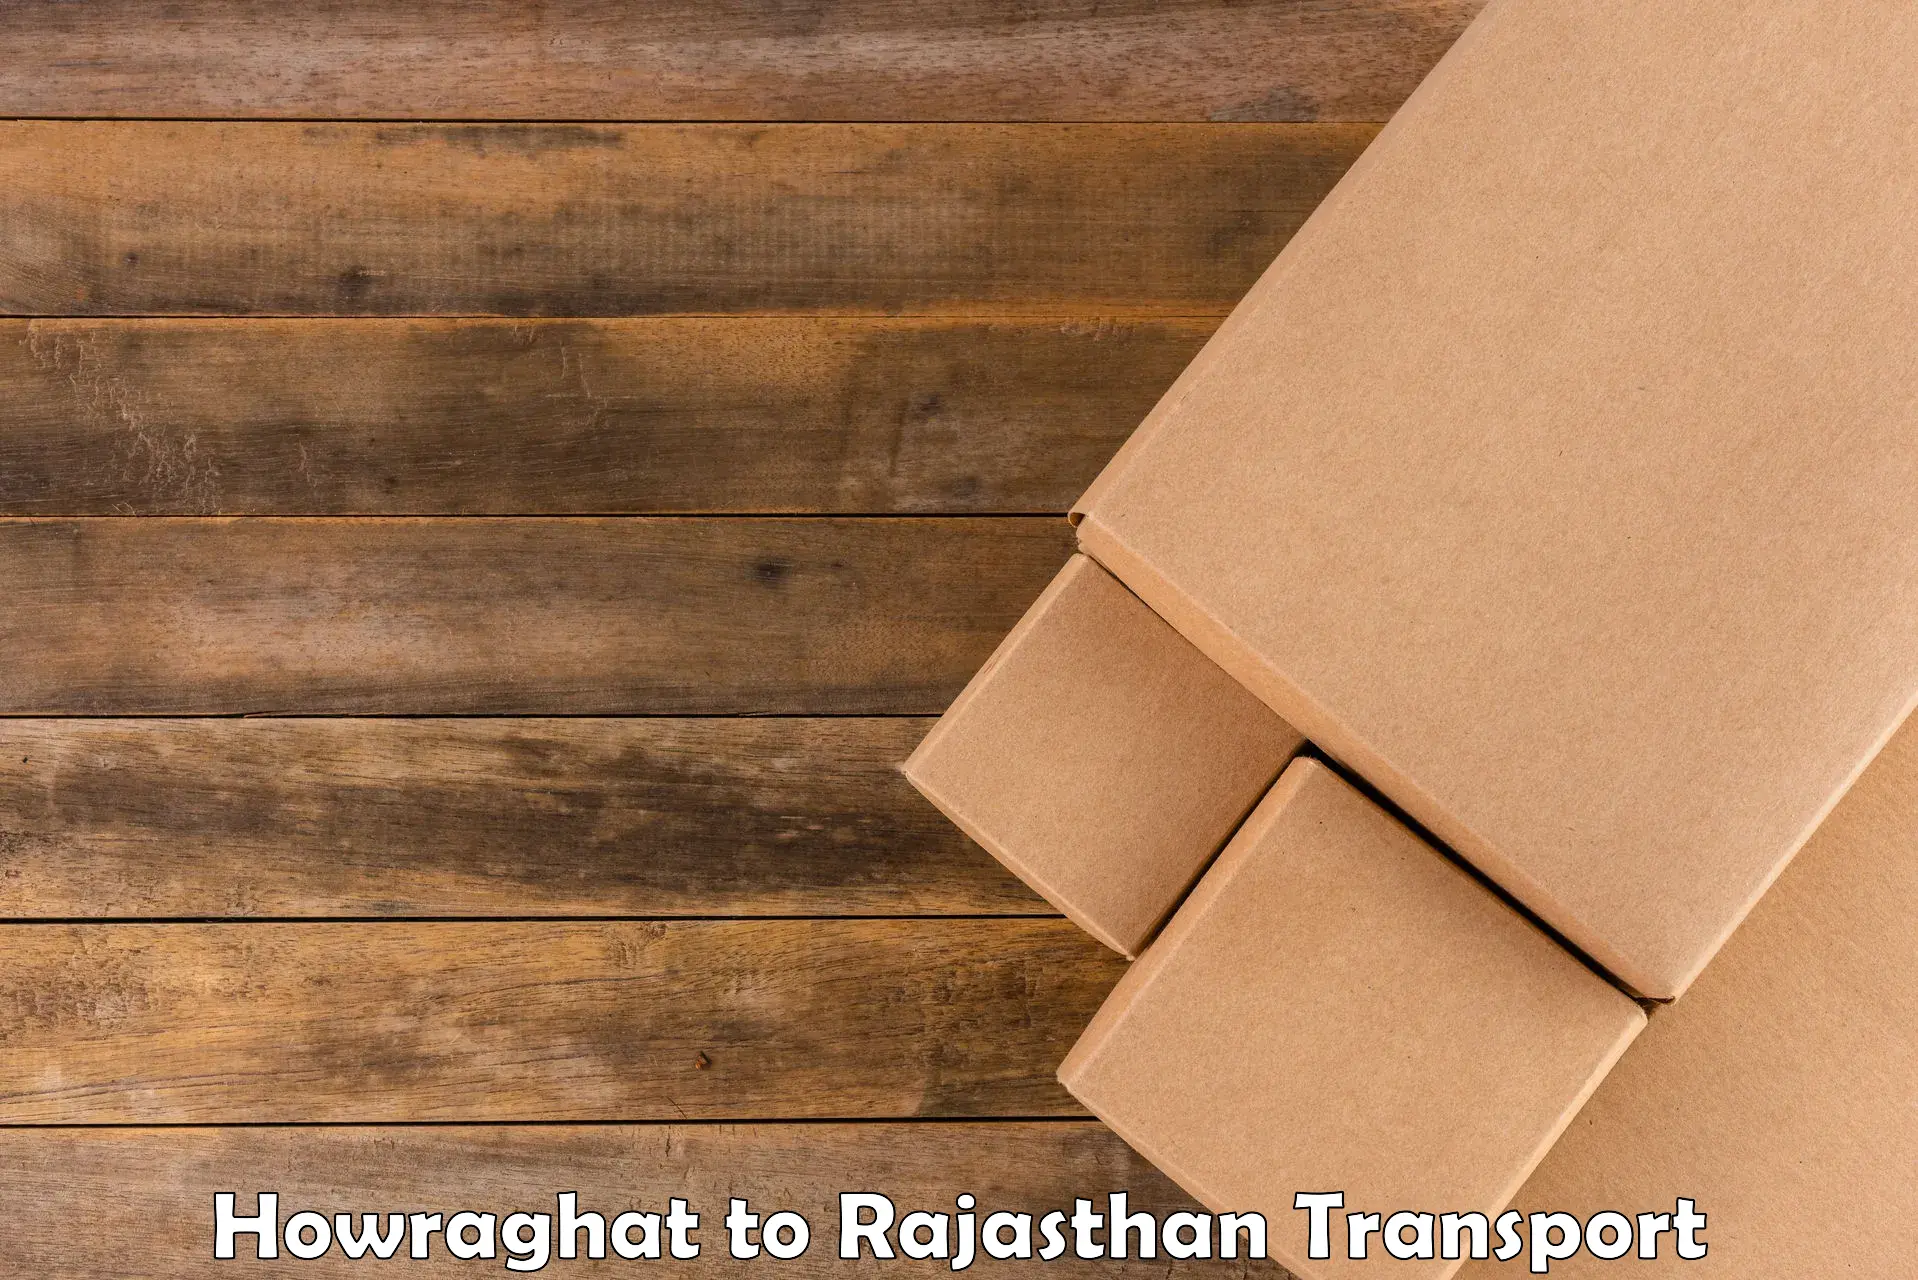 Container transportation services Howraghat to Jhalawar